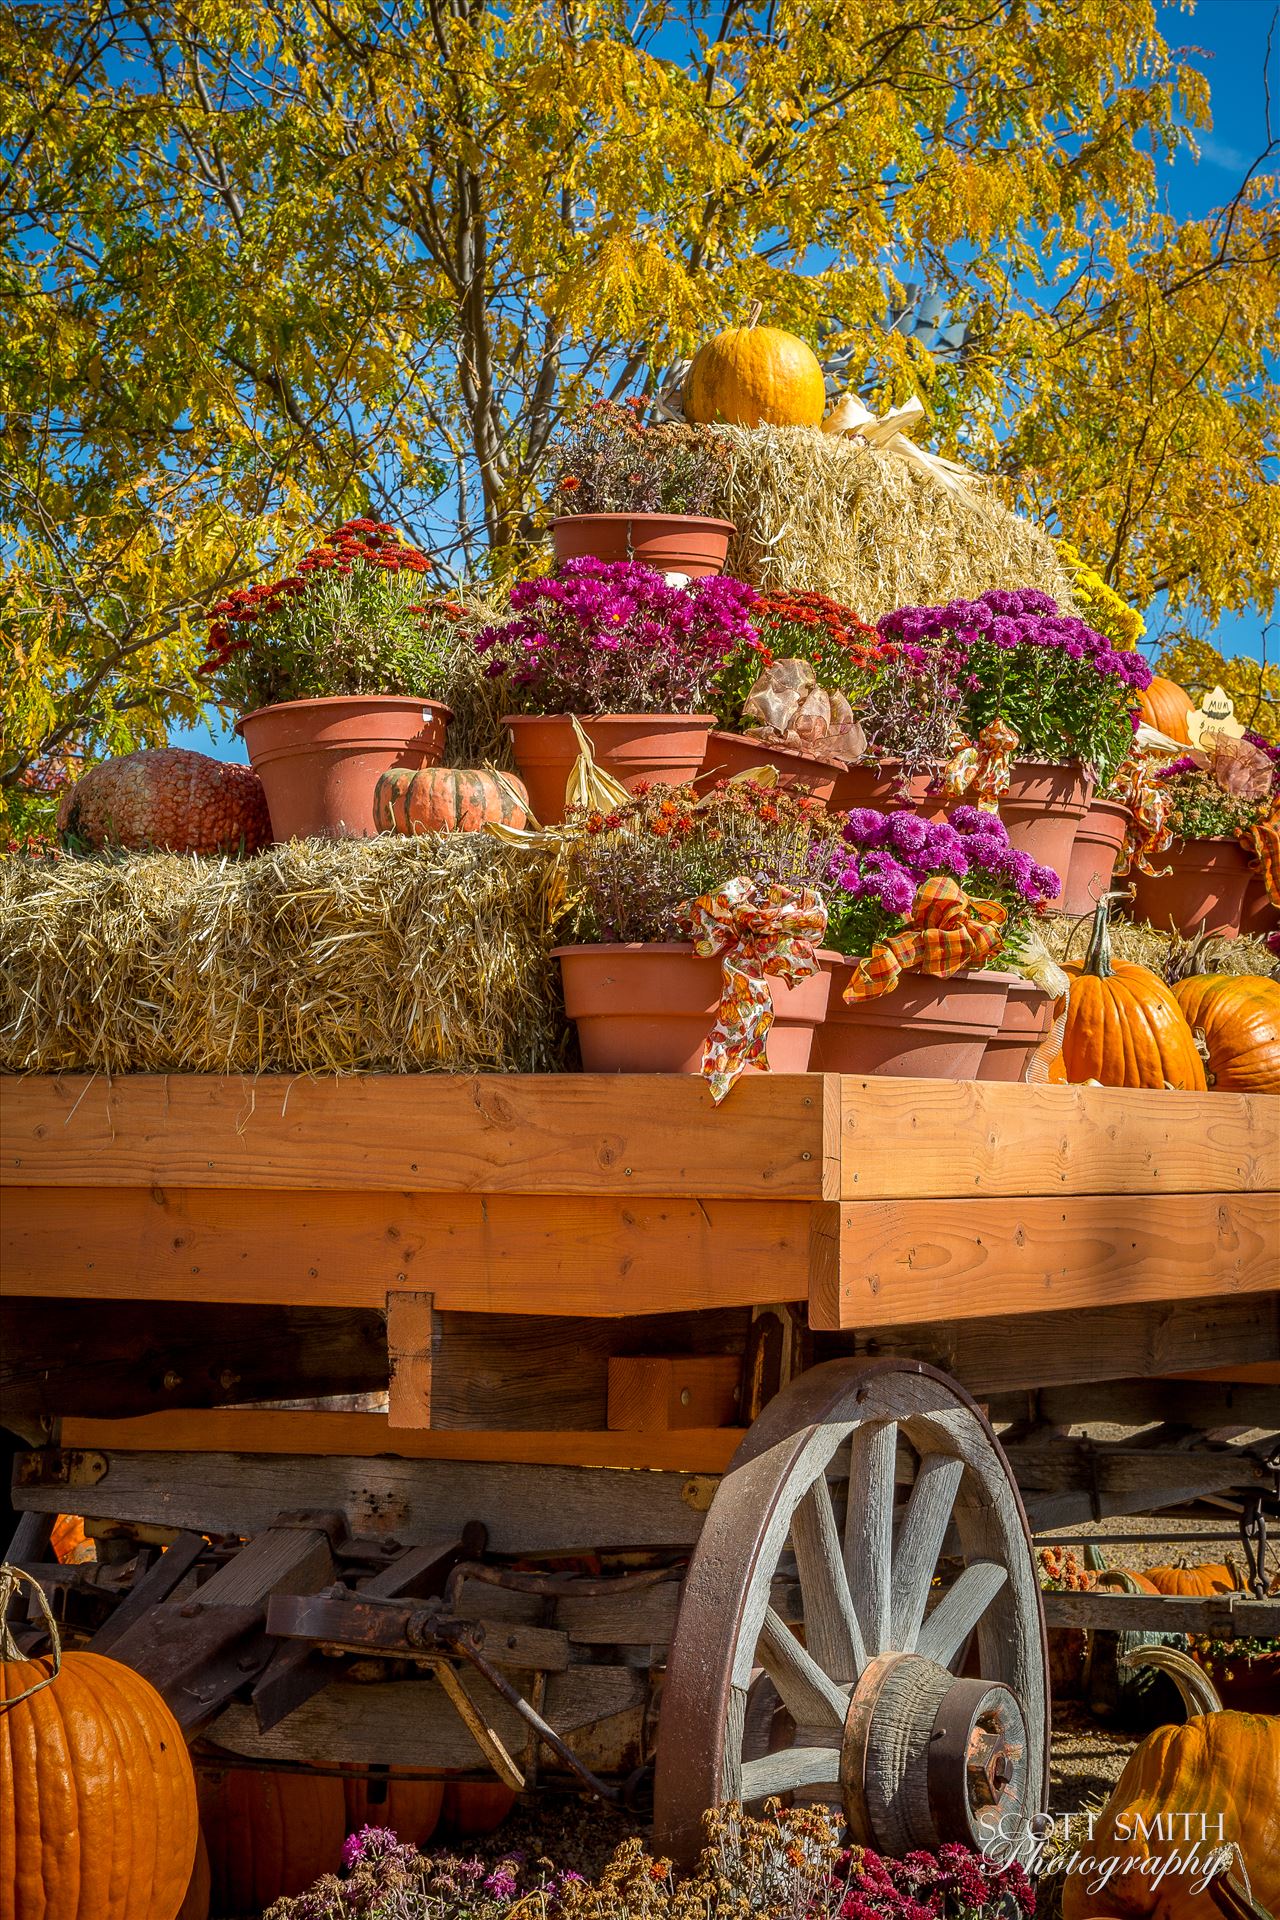 Bounty - A wagon full of fall flowers and pumpkins - from Anderson Farms, Erie Colorado. by Scott Smith Photos